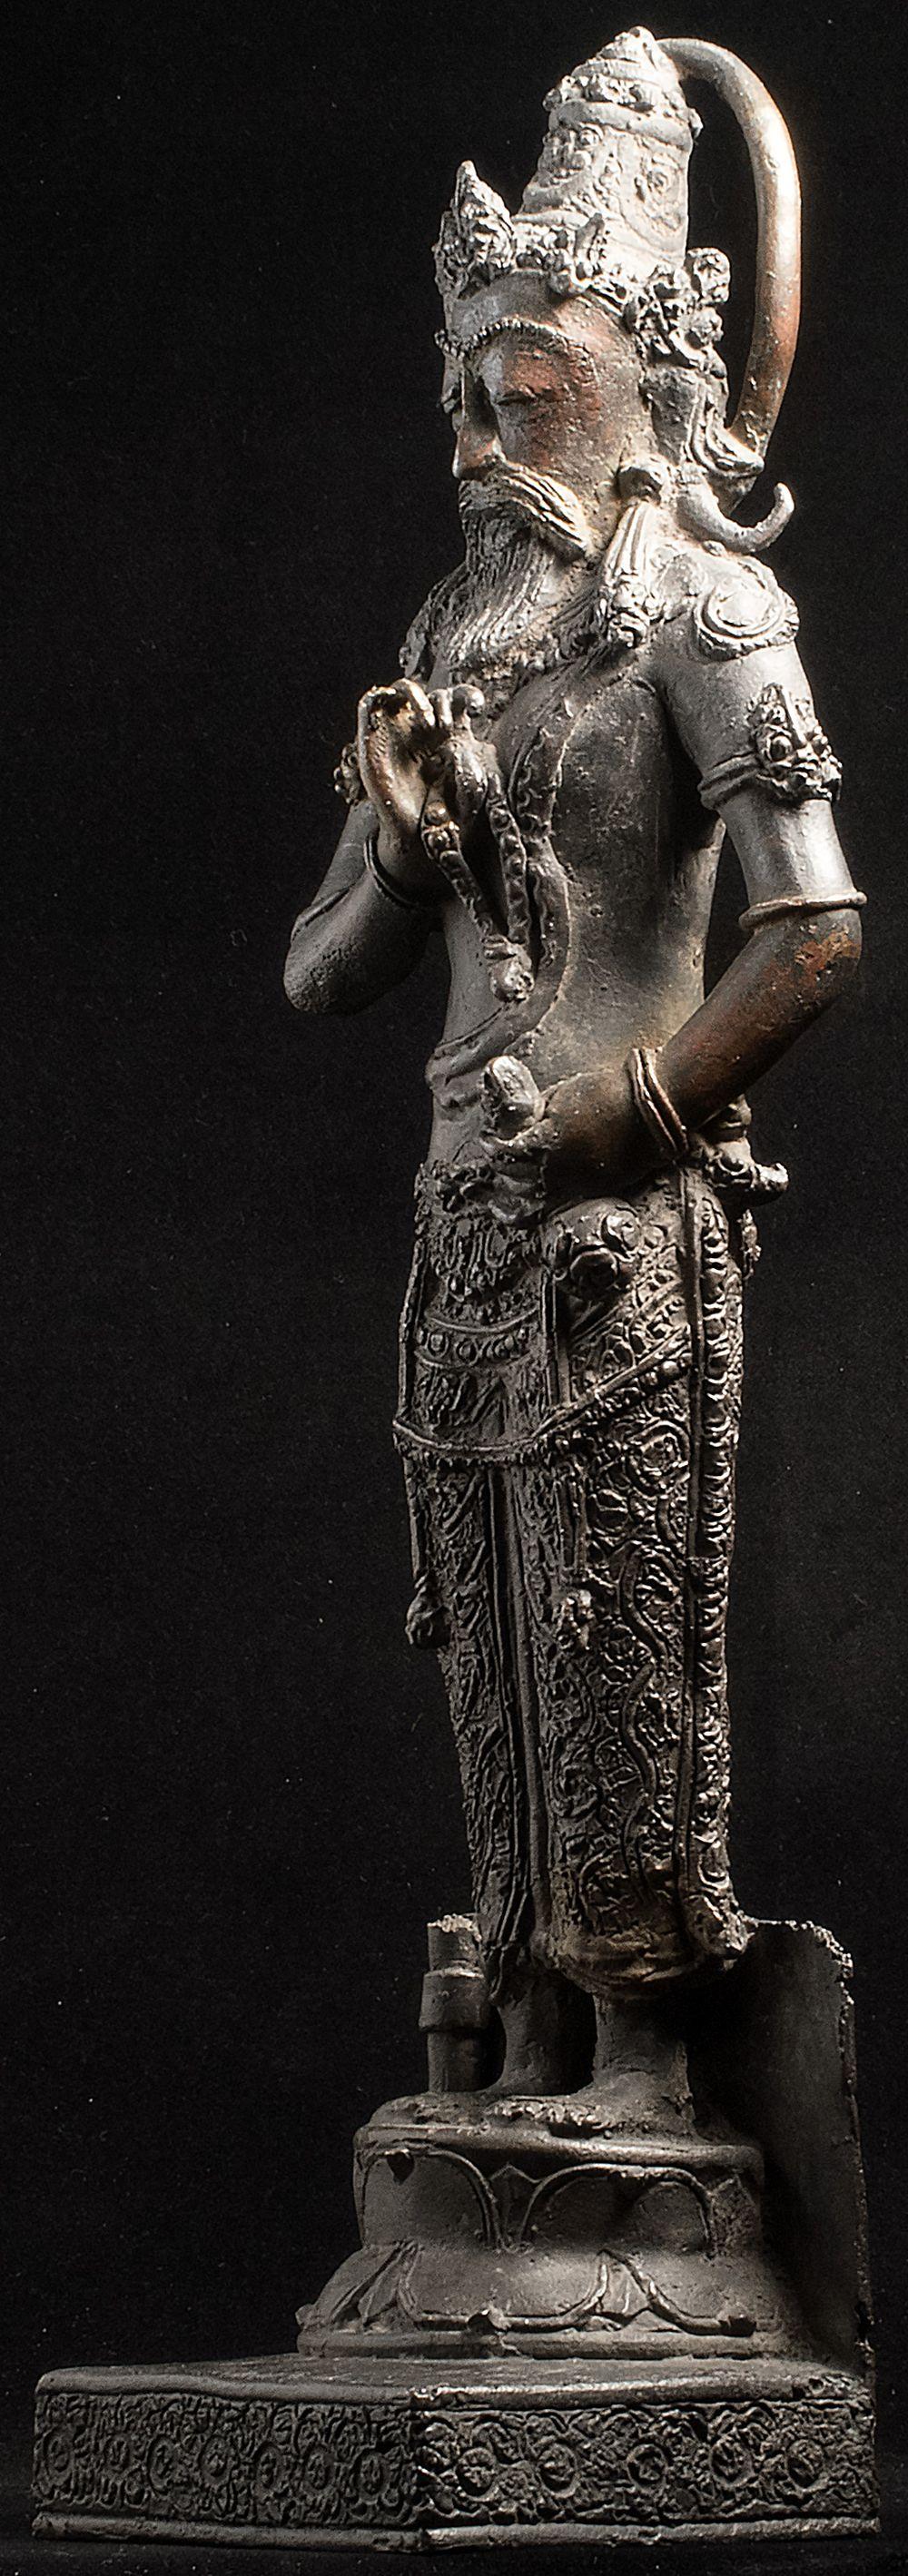 Early 20thC Indonesian (or other nearby island) depiction of Shiva. It likely had a trisula (3 pronged implement) in its right hand going all the way to the base, and possibly a back plate that broke off. It is one of the best of this type of piece